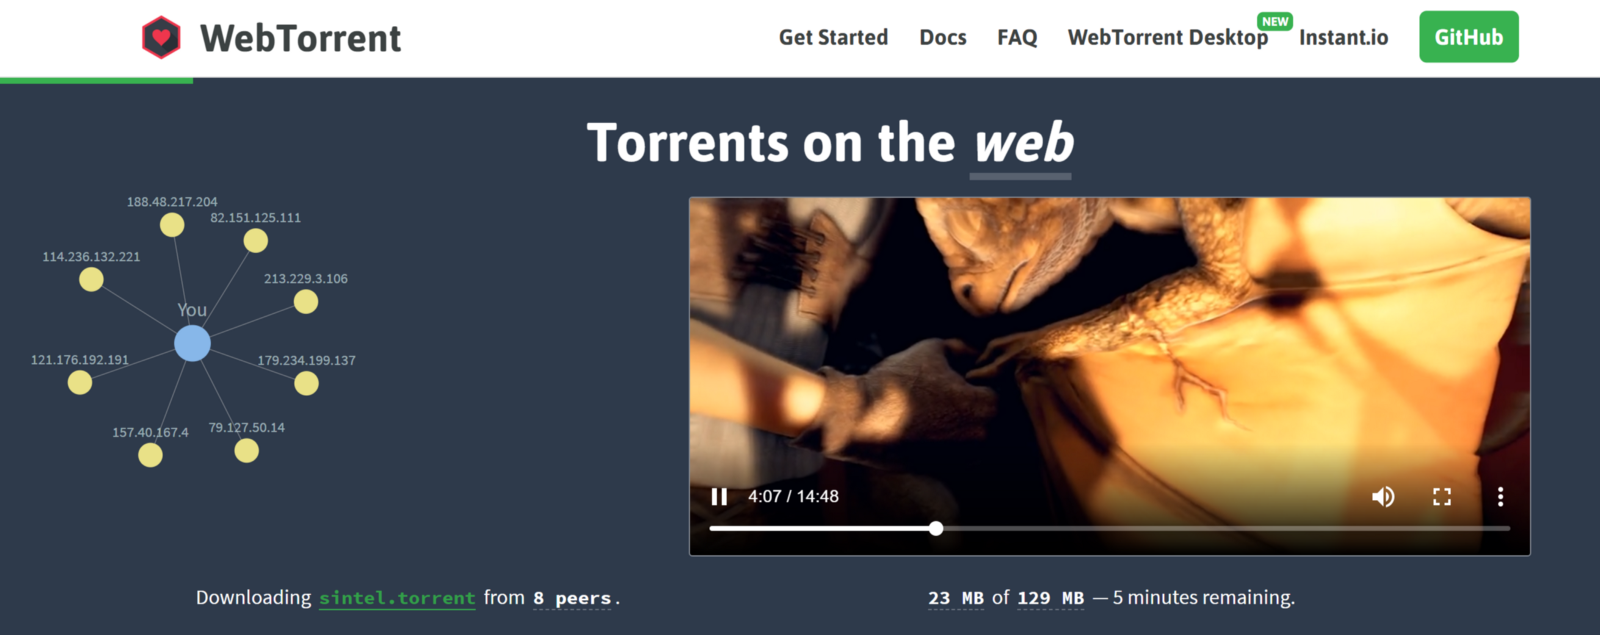 Torrent Web Video Collection 4 P